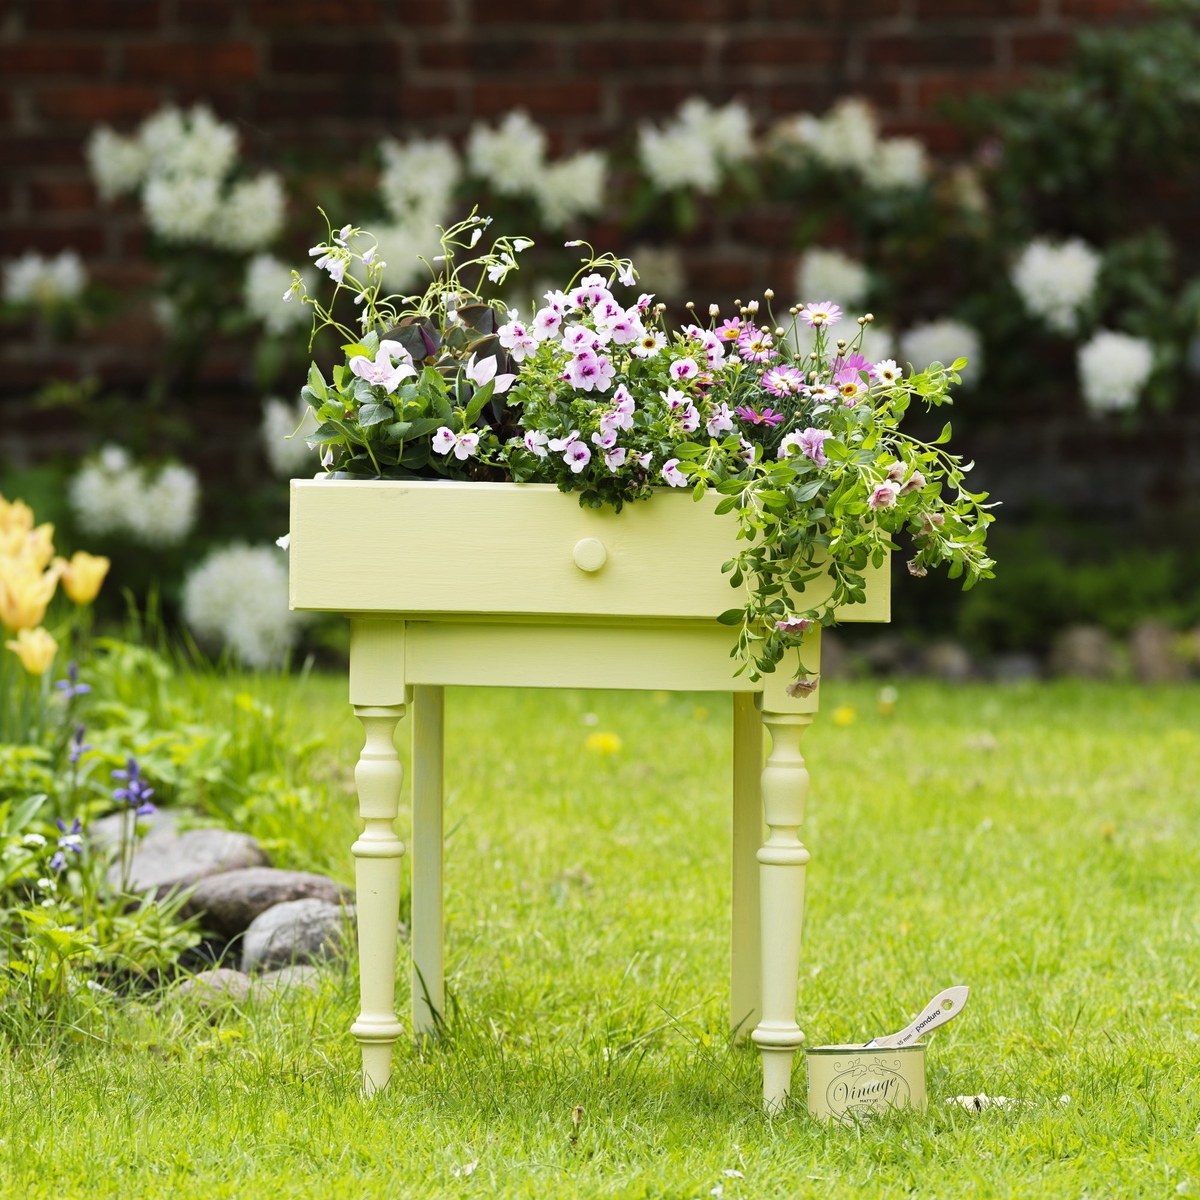 Make an upcycled planter out of a drawer